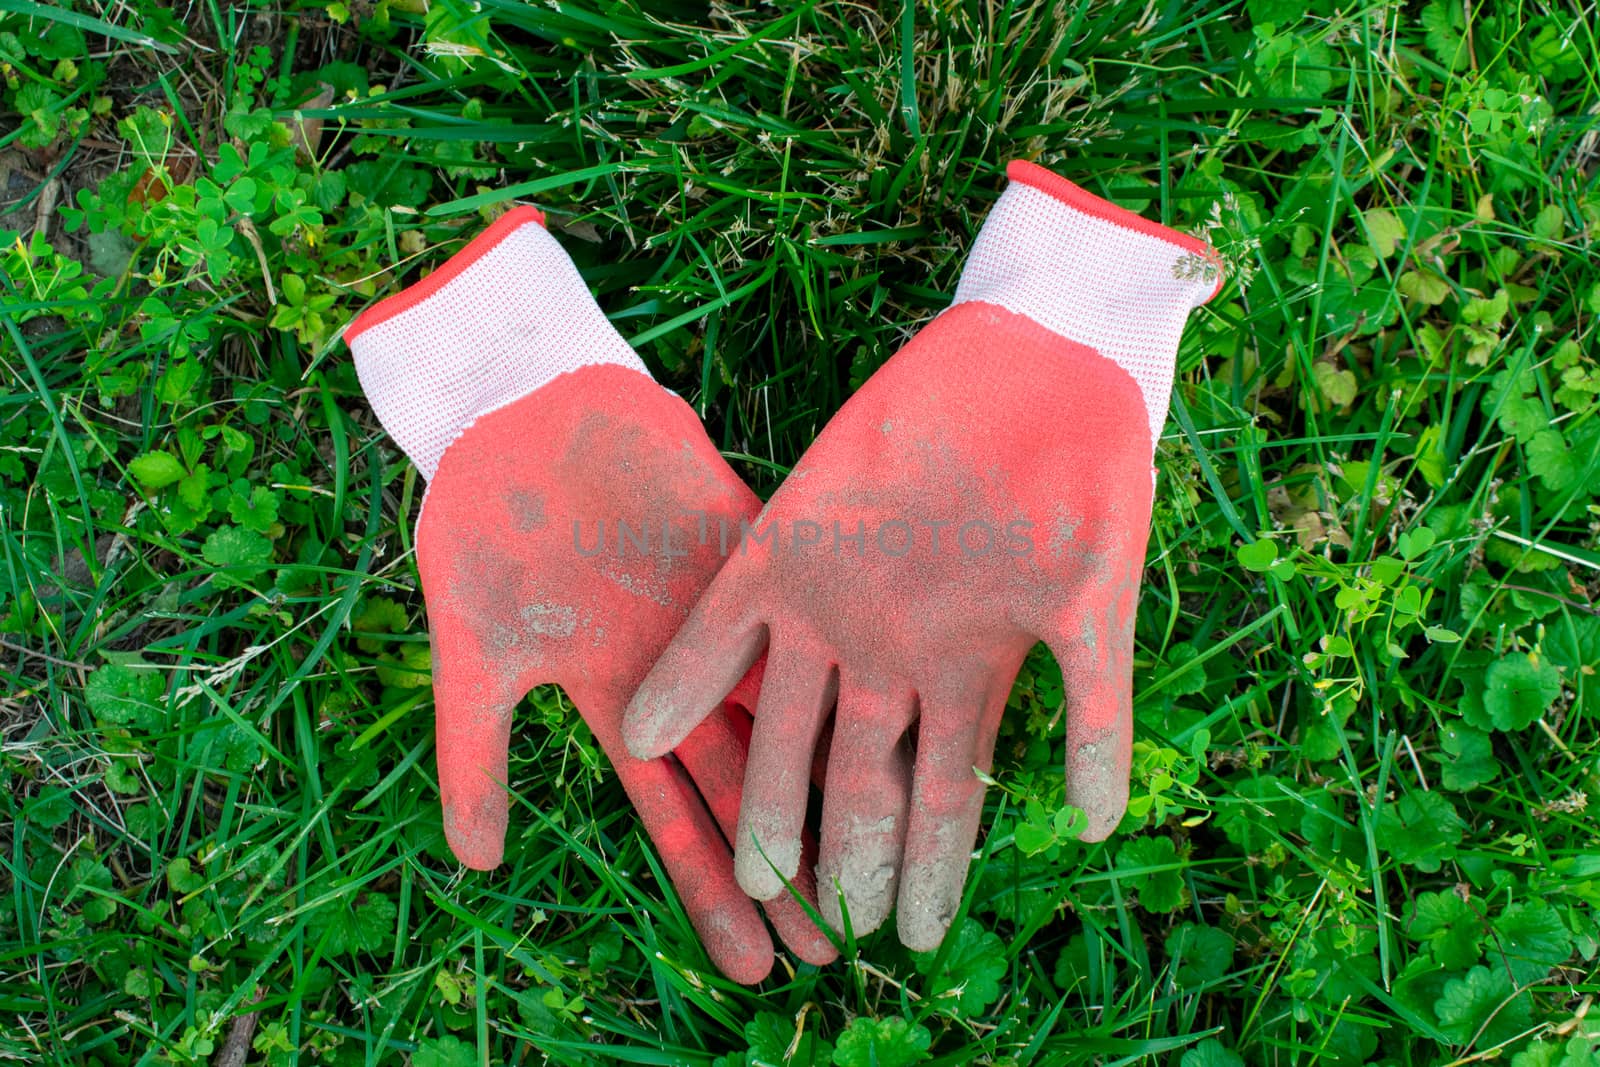 Gardening Gloves Laying in a Patch of Grass by bju12290